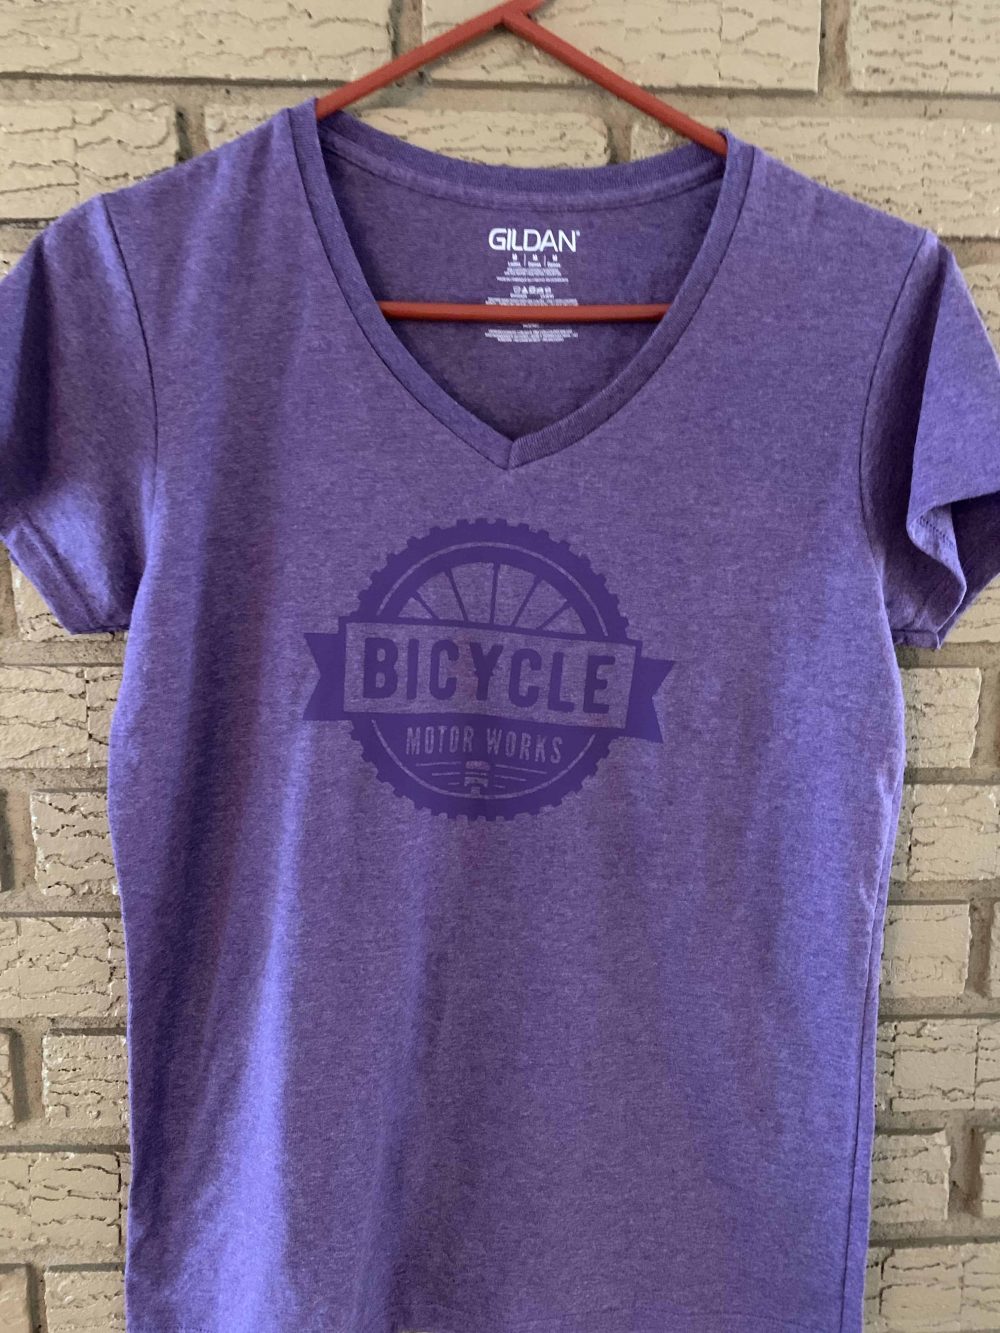 A purple shirt with the word bicycle on it.